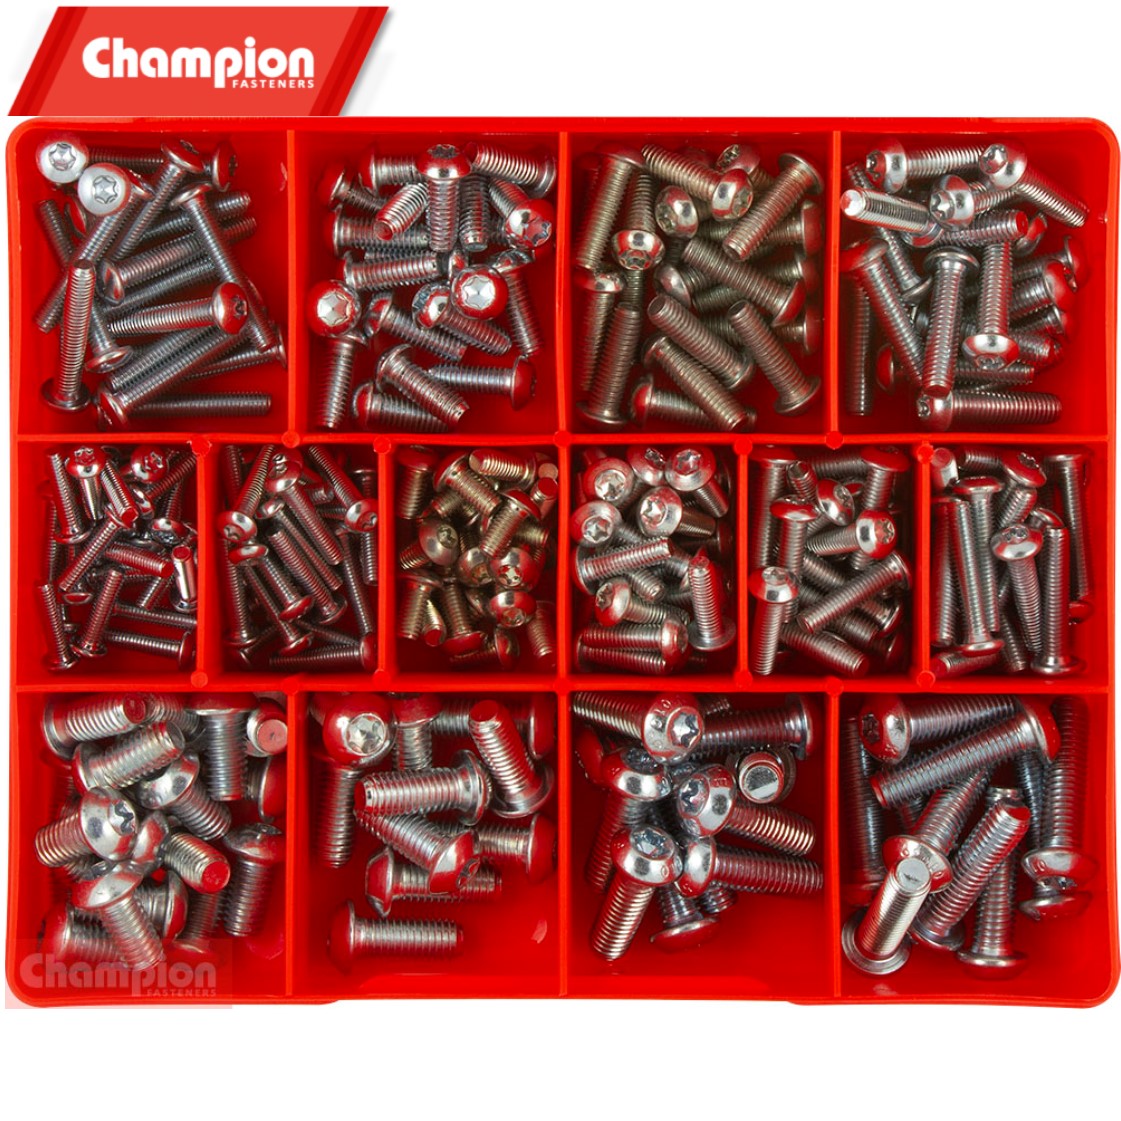 Ca1784 Champion Fasteners Torx Security Button Head Screws Assortment Kit Collins Tools And Welding 